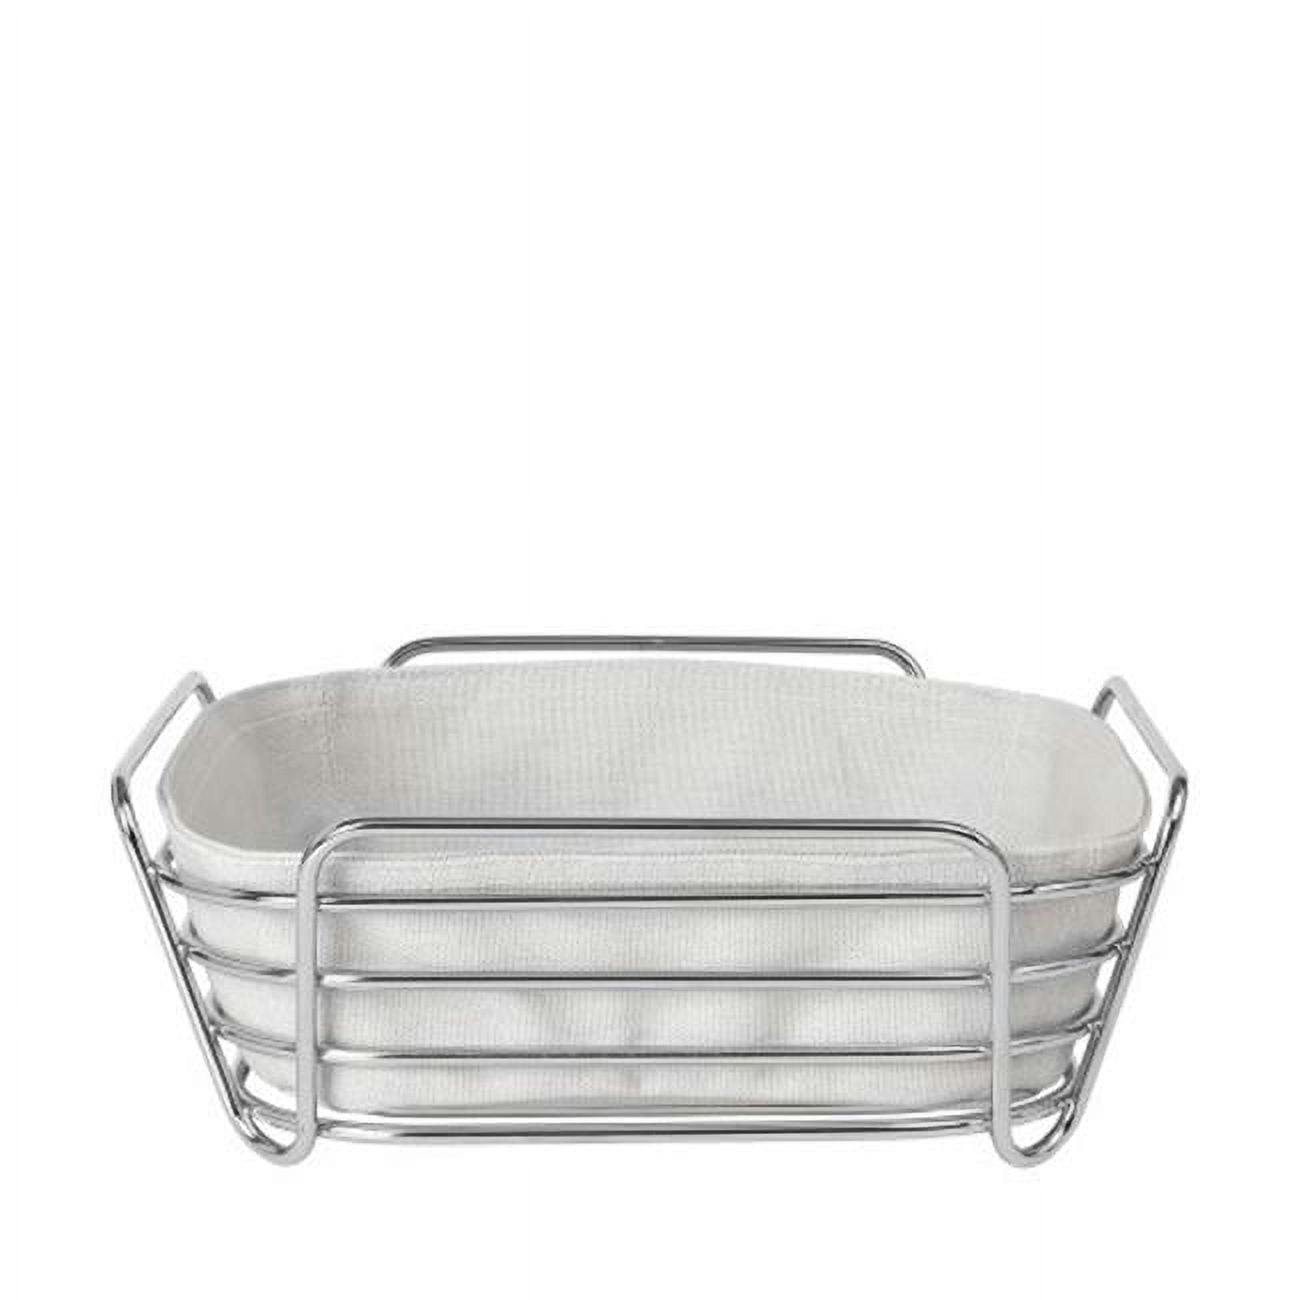 Moonbeam-Cream Chrome-Plated Steel Wire Bread Basket with Cotton Liner